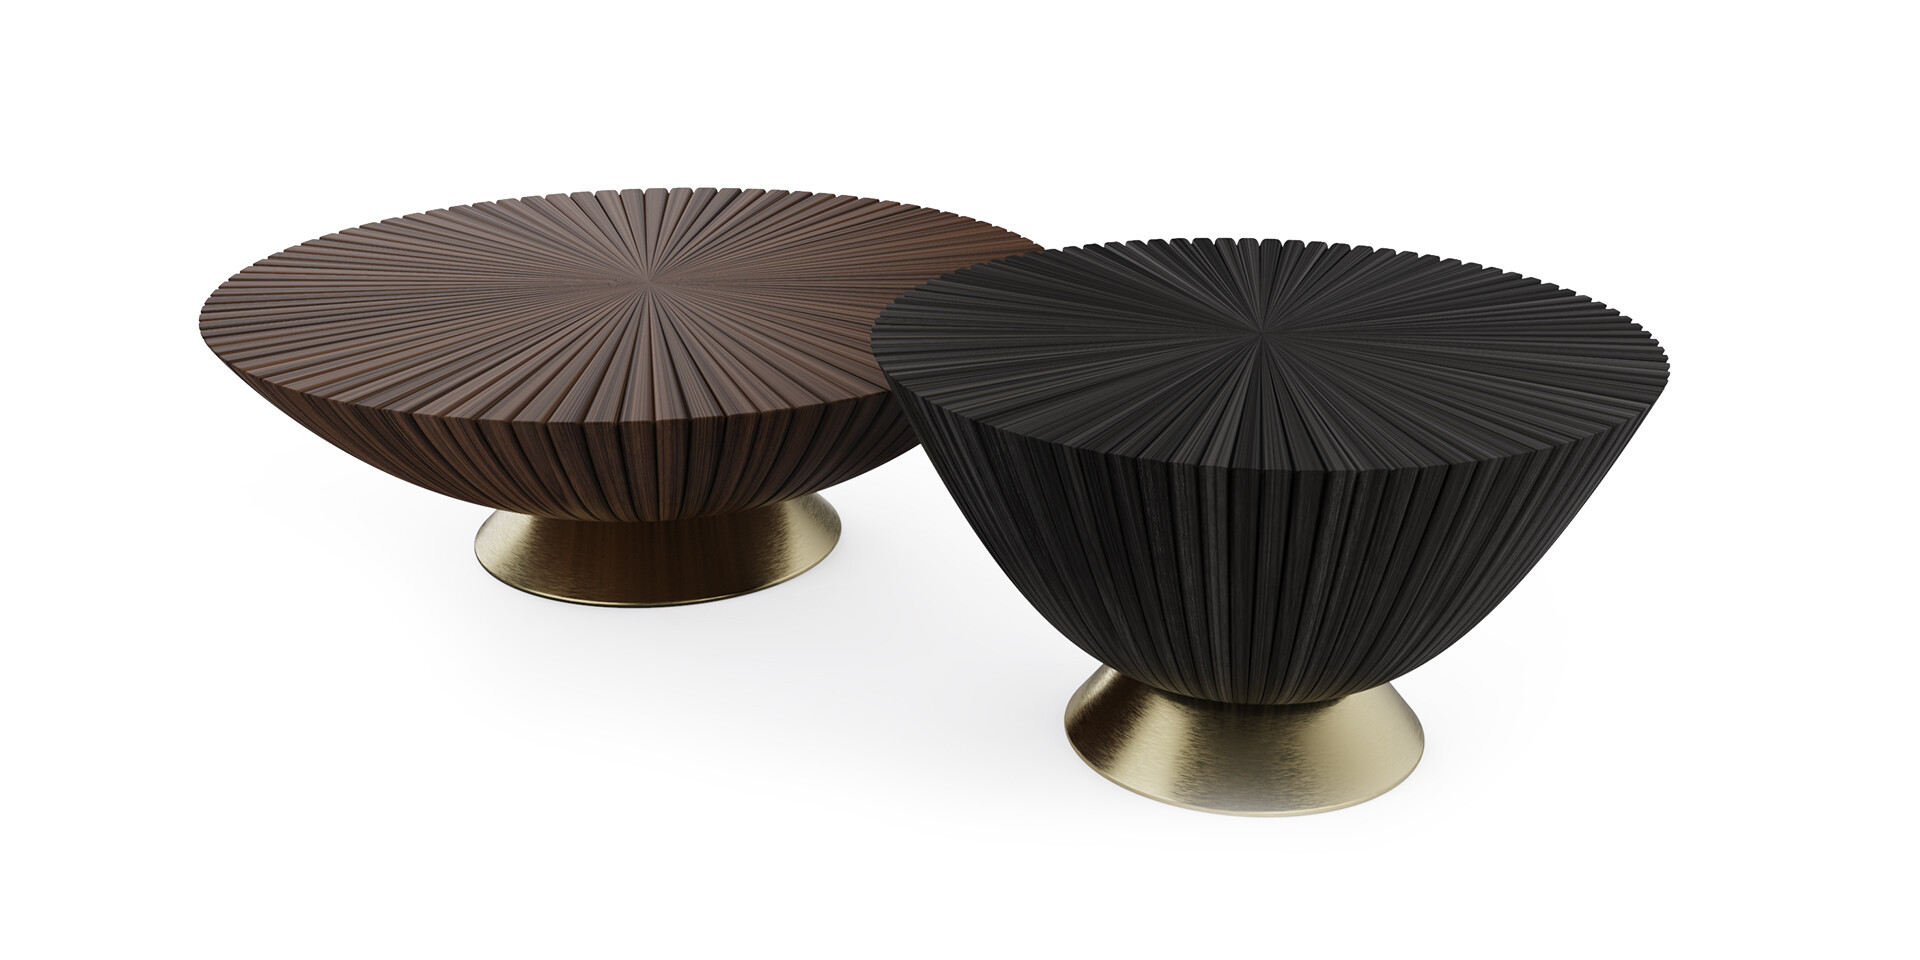 GOATHI COFFEE TABLE - Front Top View - ALMA de LUCE